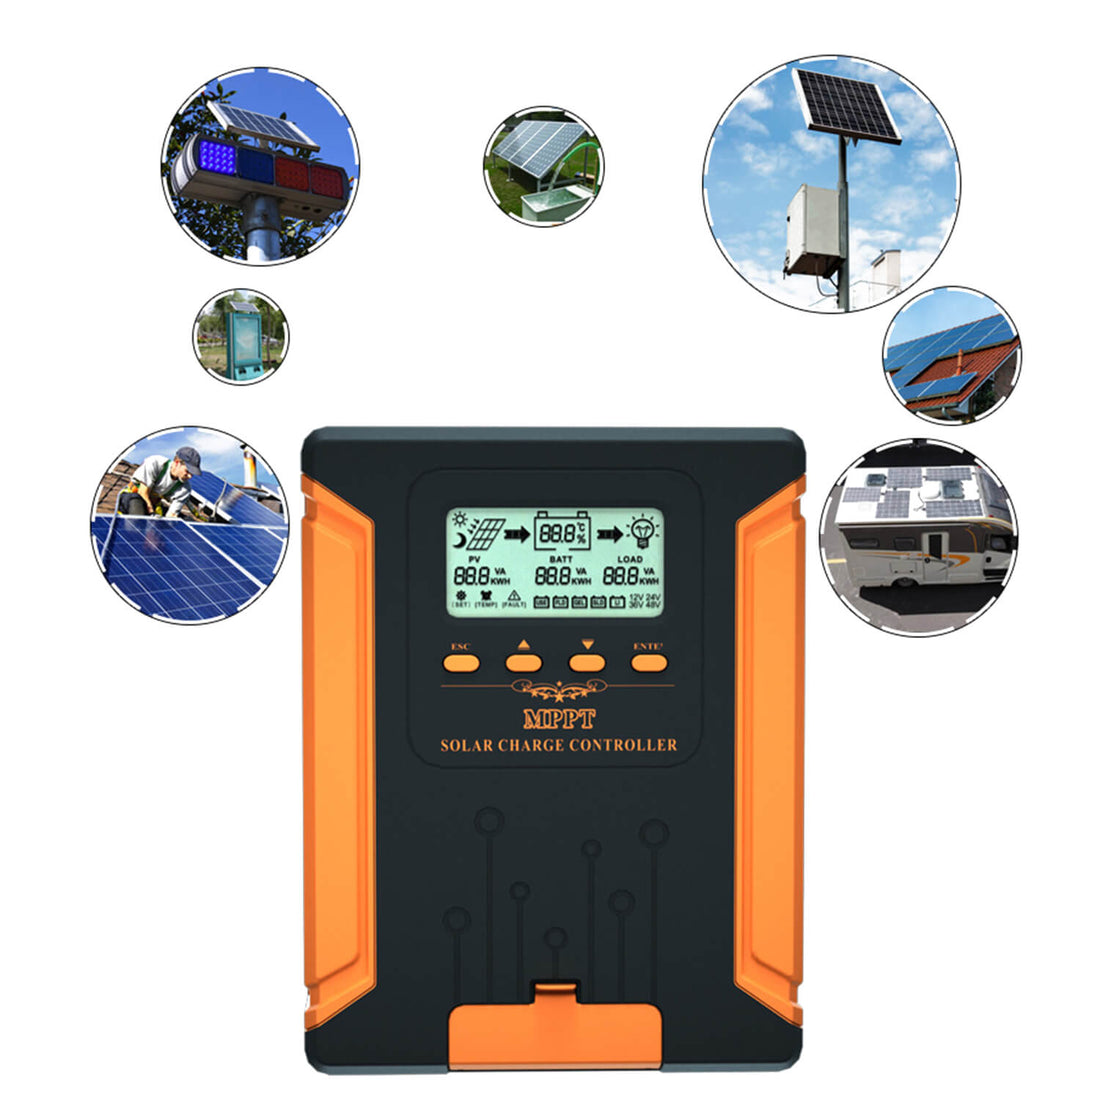 Solar charge controller MPPT 12V/24V automatic solar controller LCD display for lead acid lithium